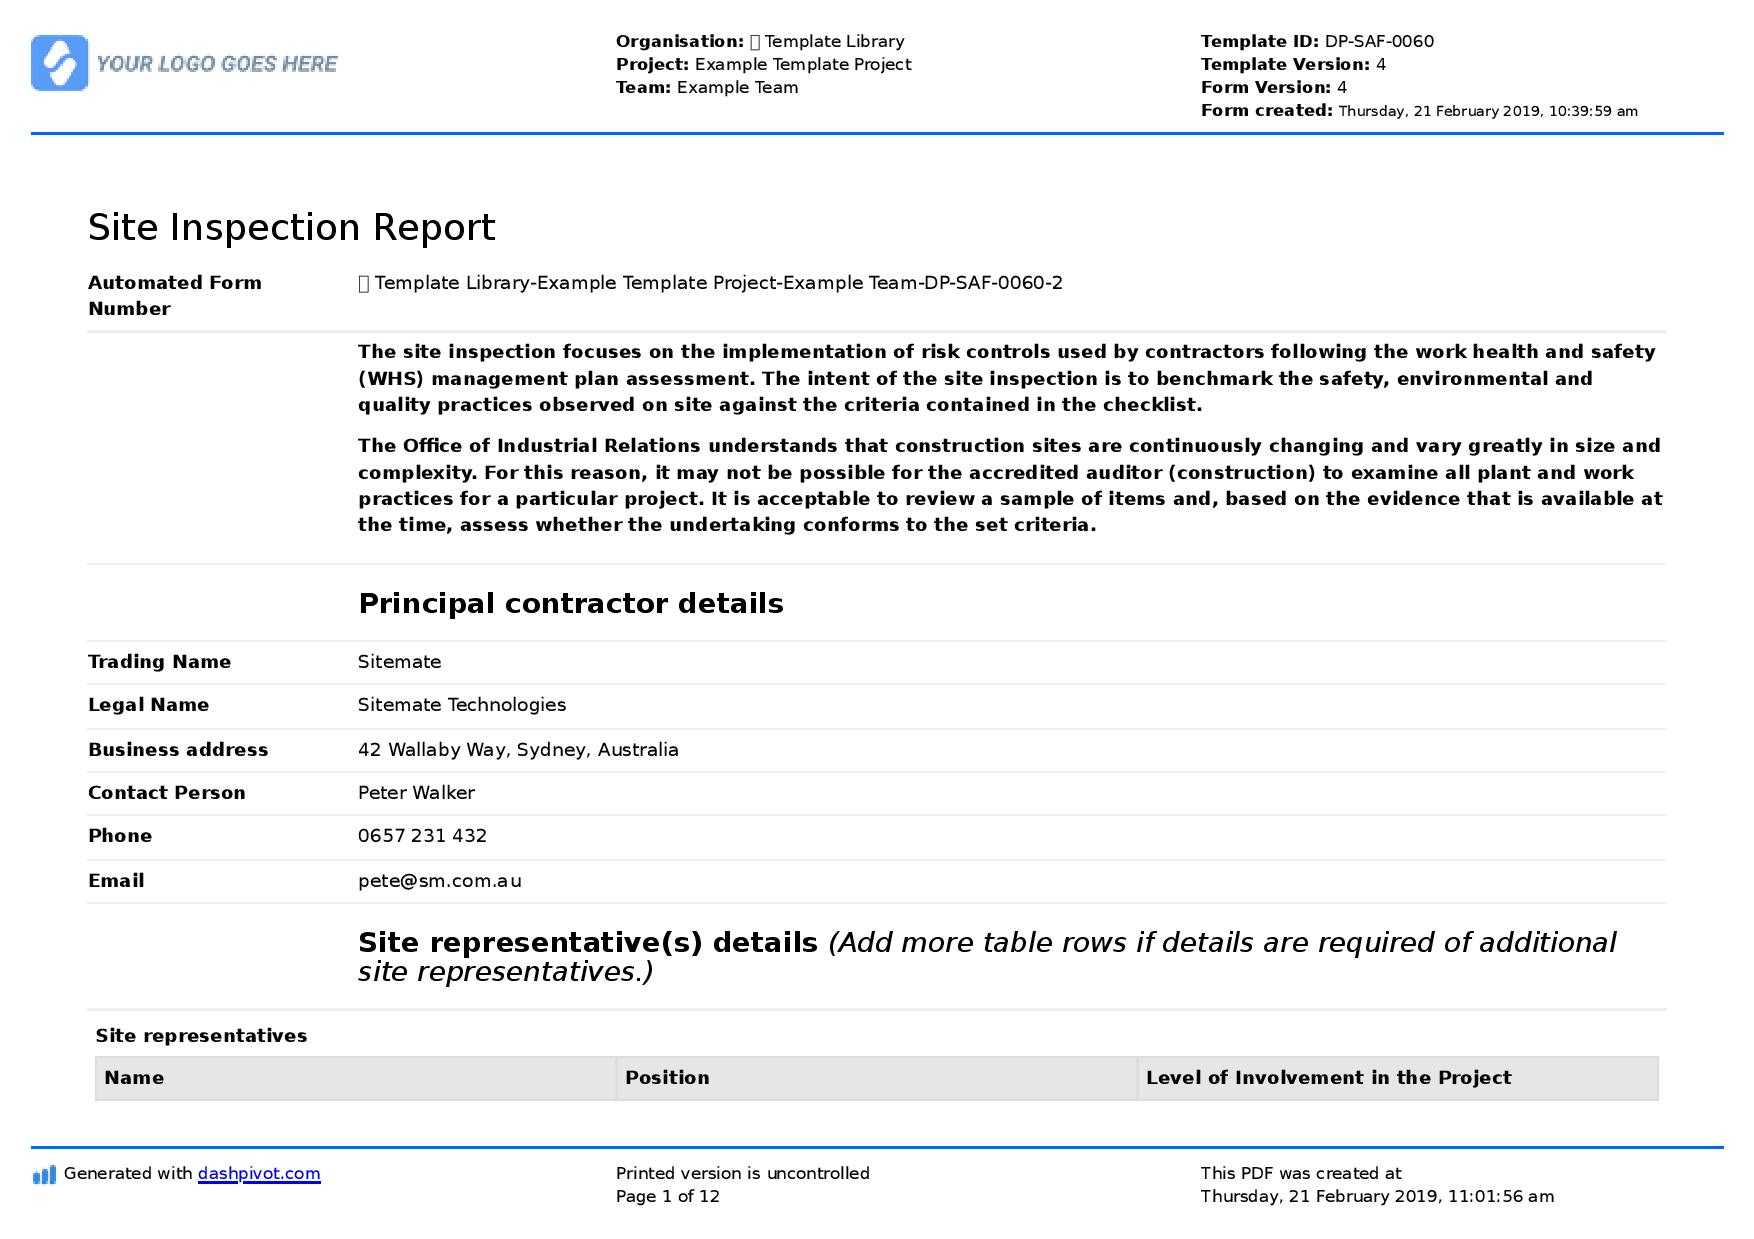 Site Inspection Report: Free Template, Sample And A Proven Inside Daily Inspection Report Template